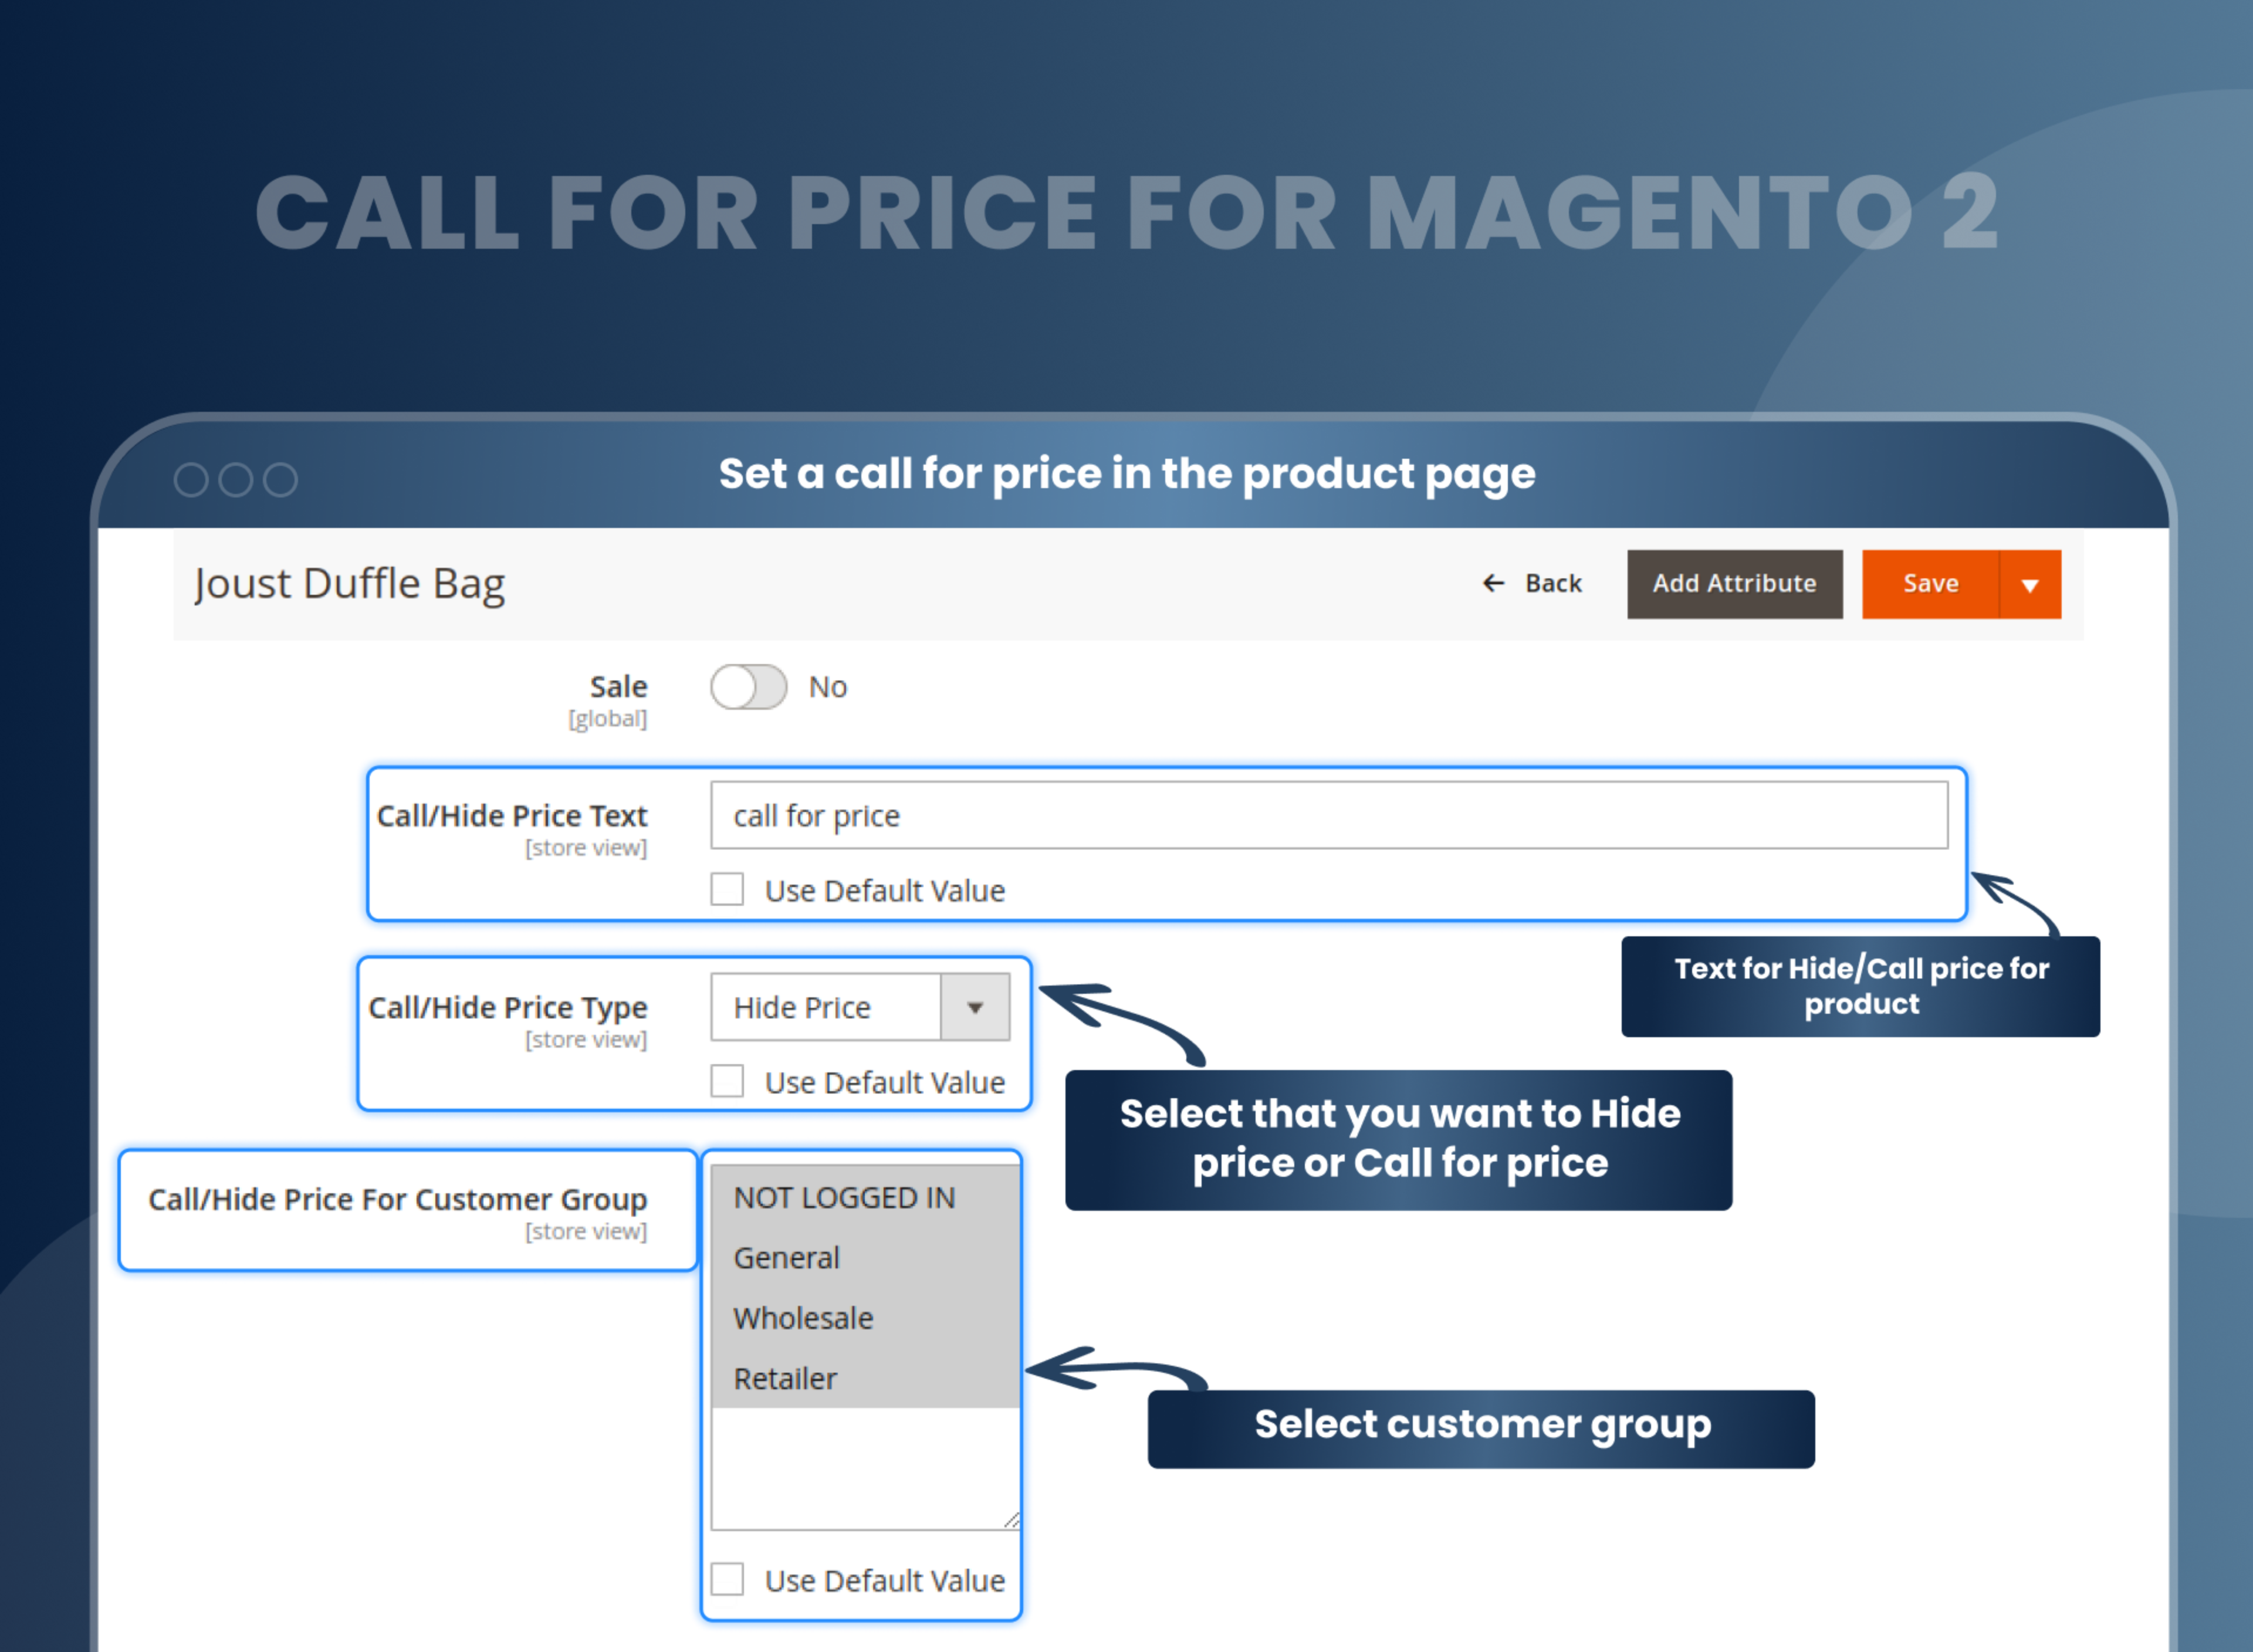 Set a call for price in the product page